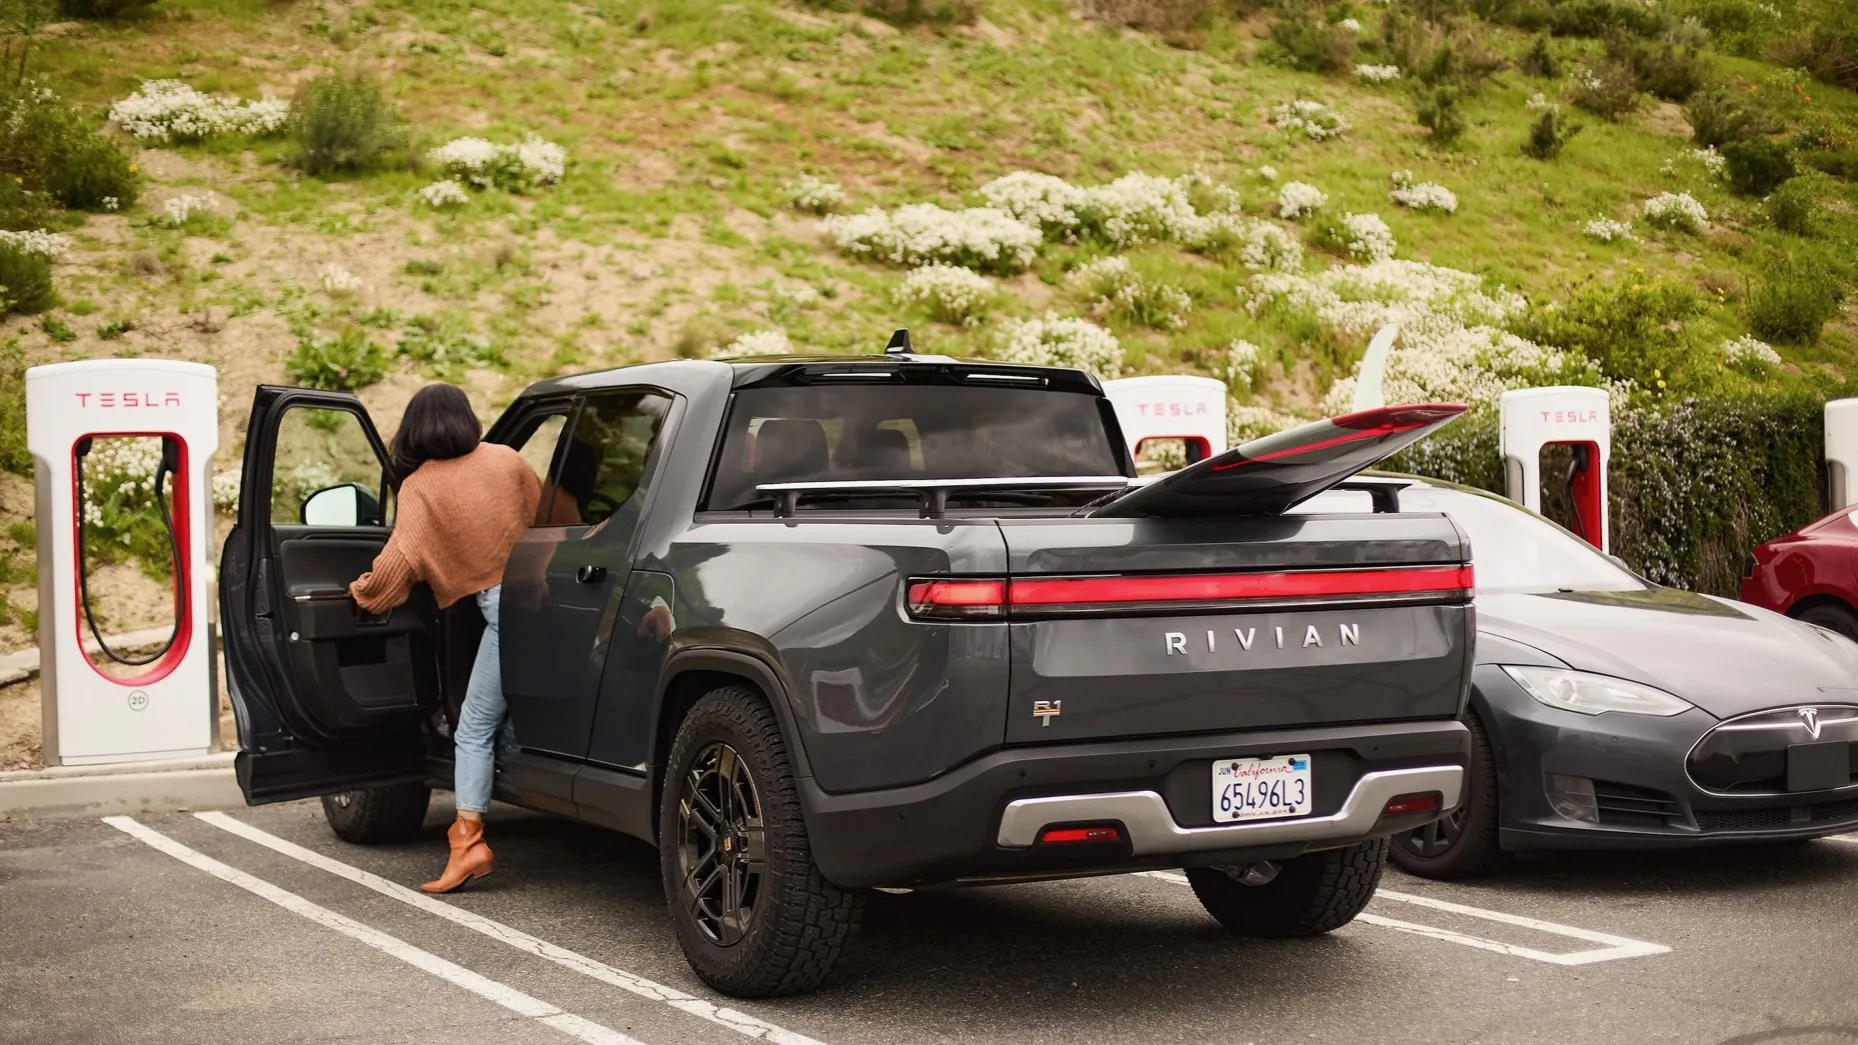 Rivian adapters arrive in April, enable Tesla Supercharger waypoints